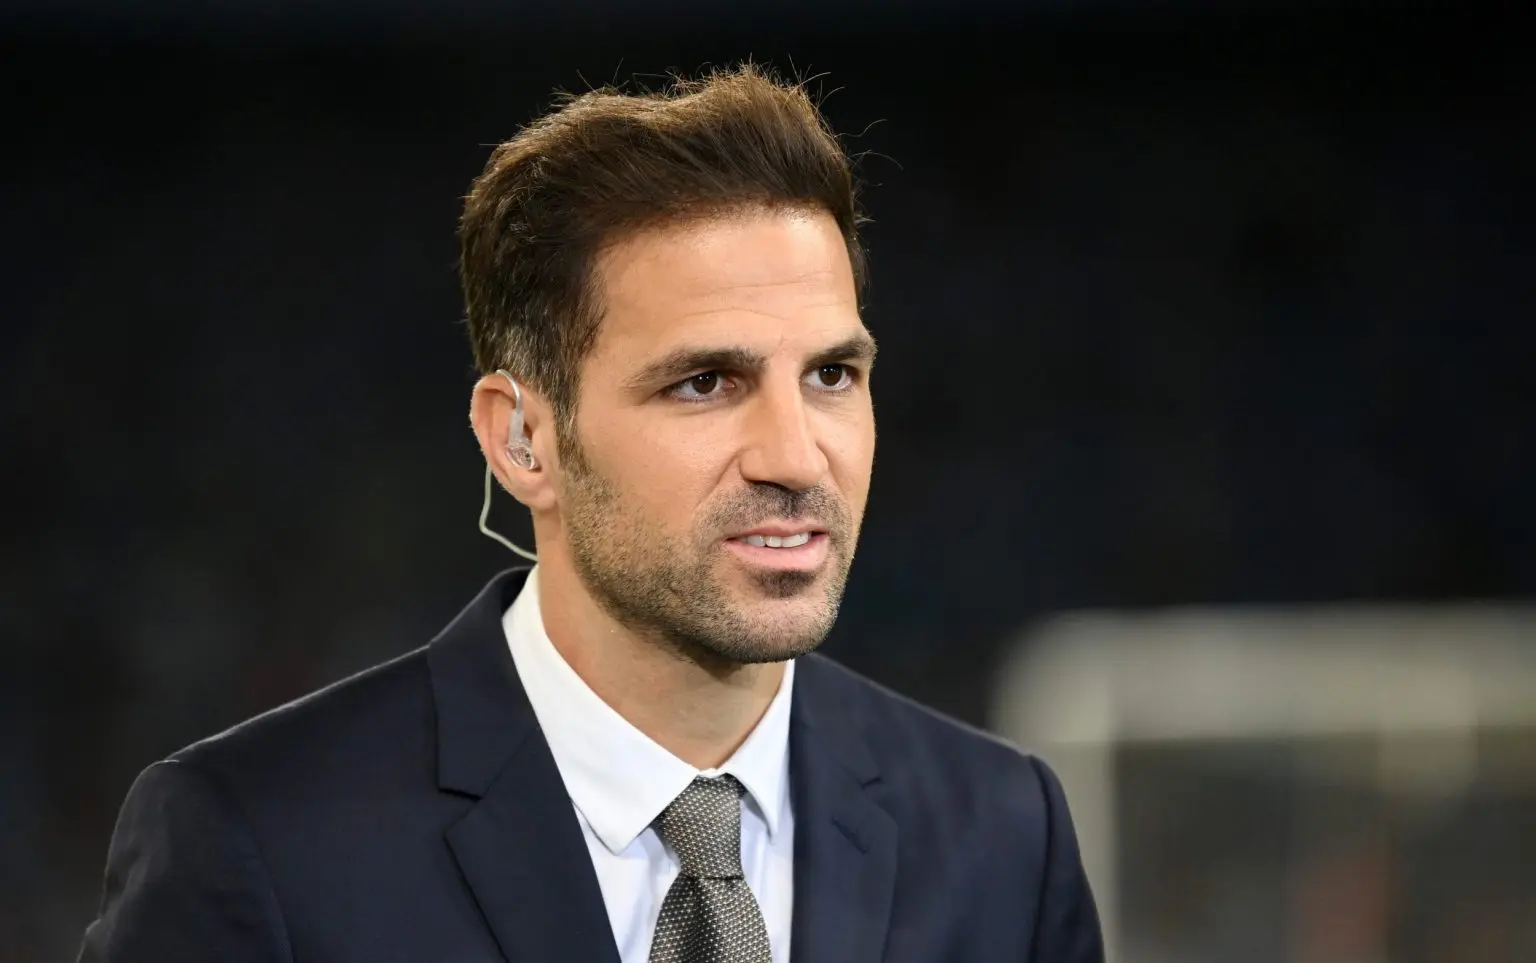 Fabregas’ first managerial job confirmed